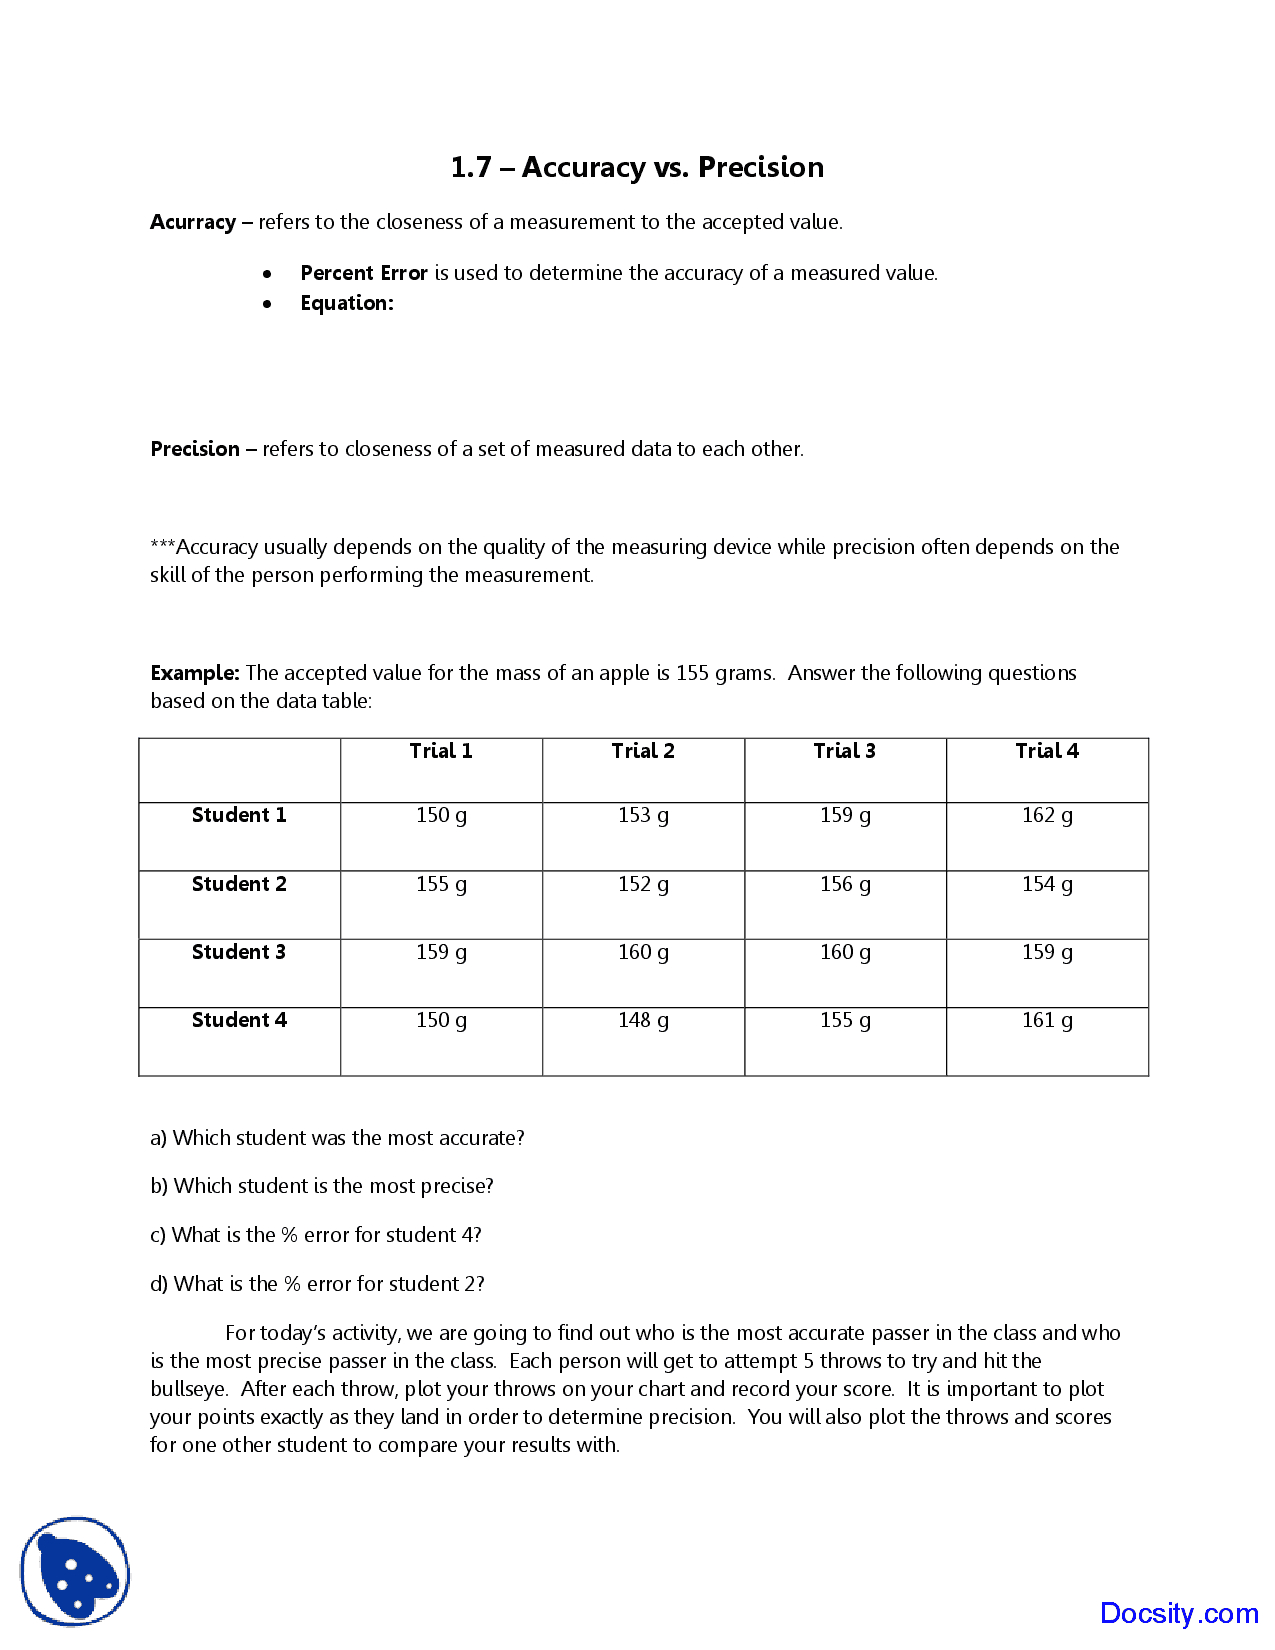 Accuracy Vs Precision  General Chemistry  Quiz  Docsity Along With Accuracy And Precision Worksheet